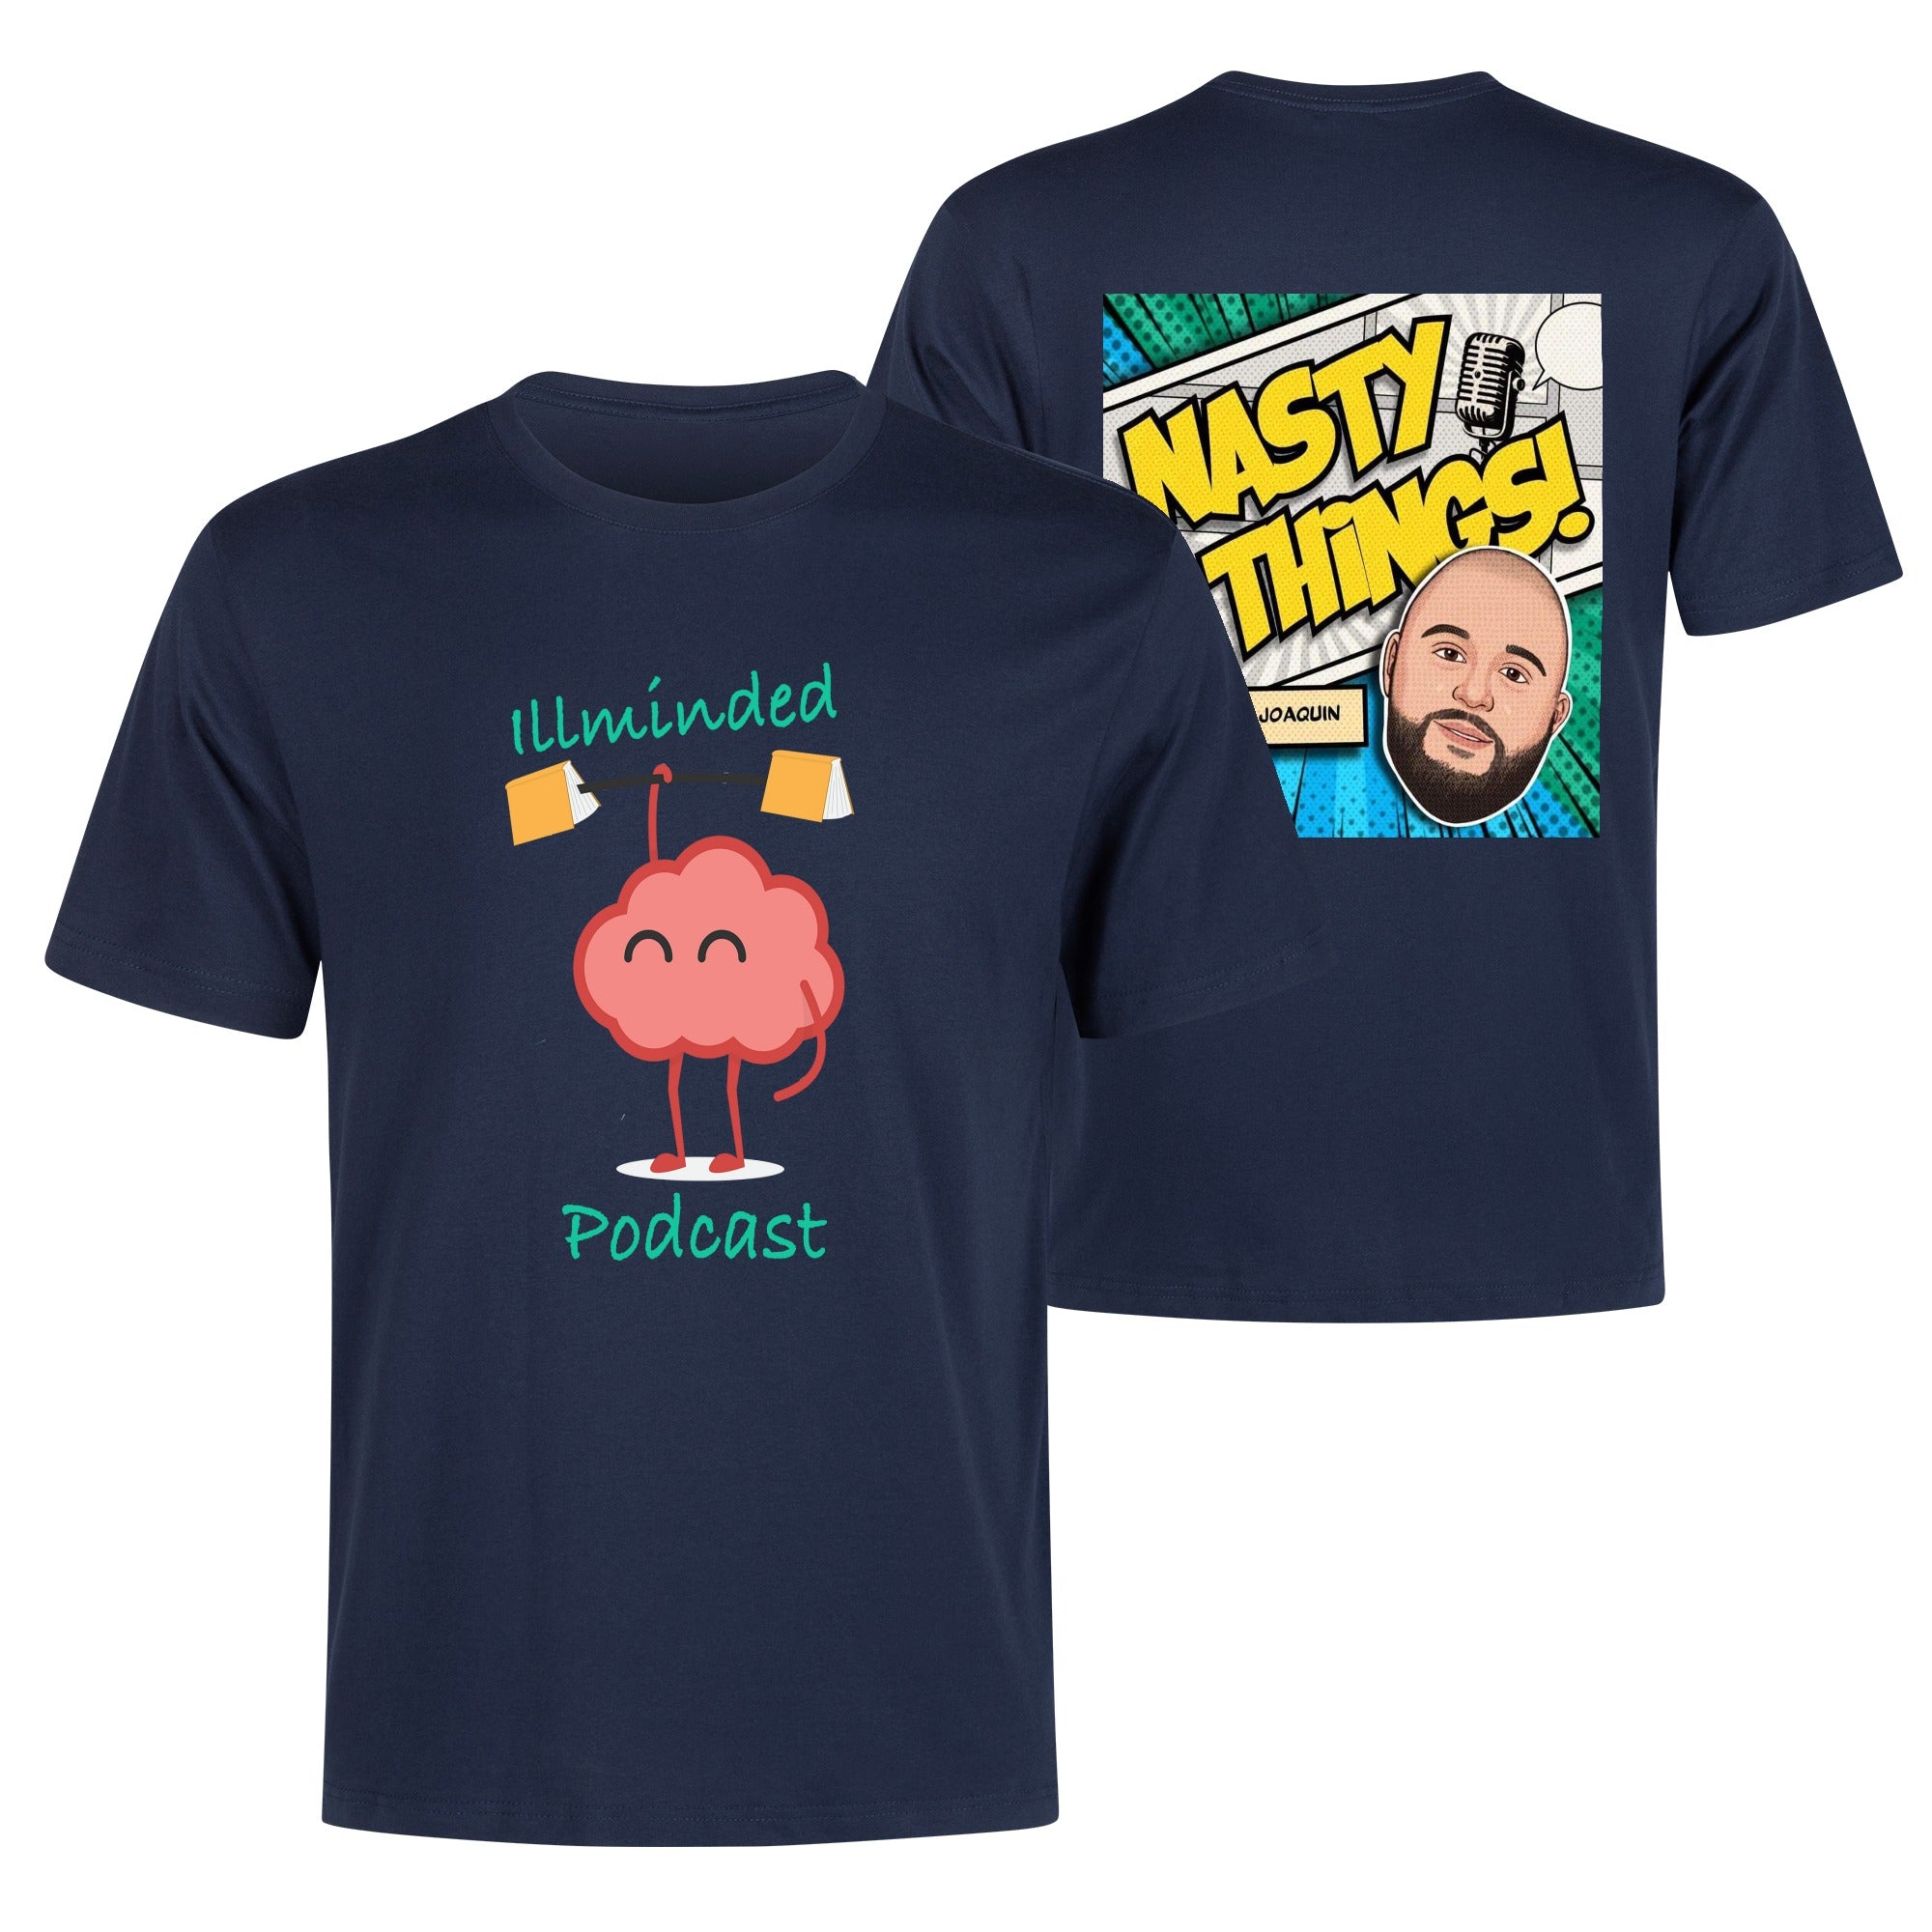 illminded Podcast & Nasty Things Podcast T Shirt